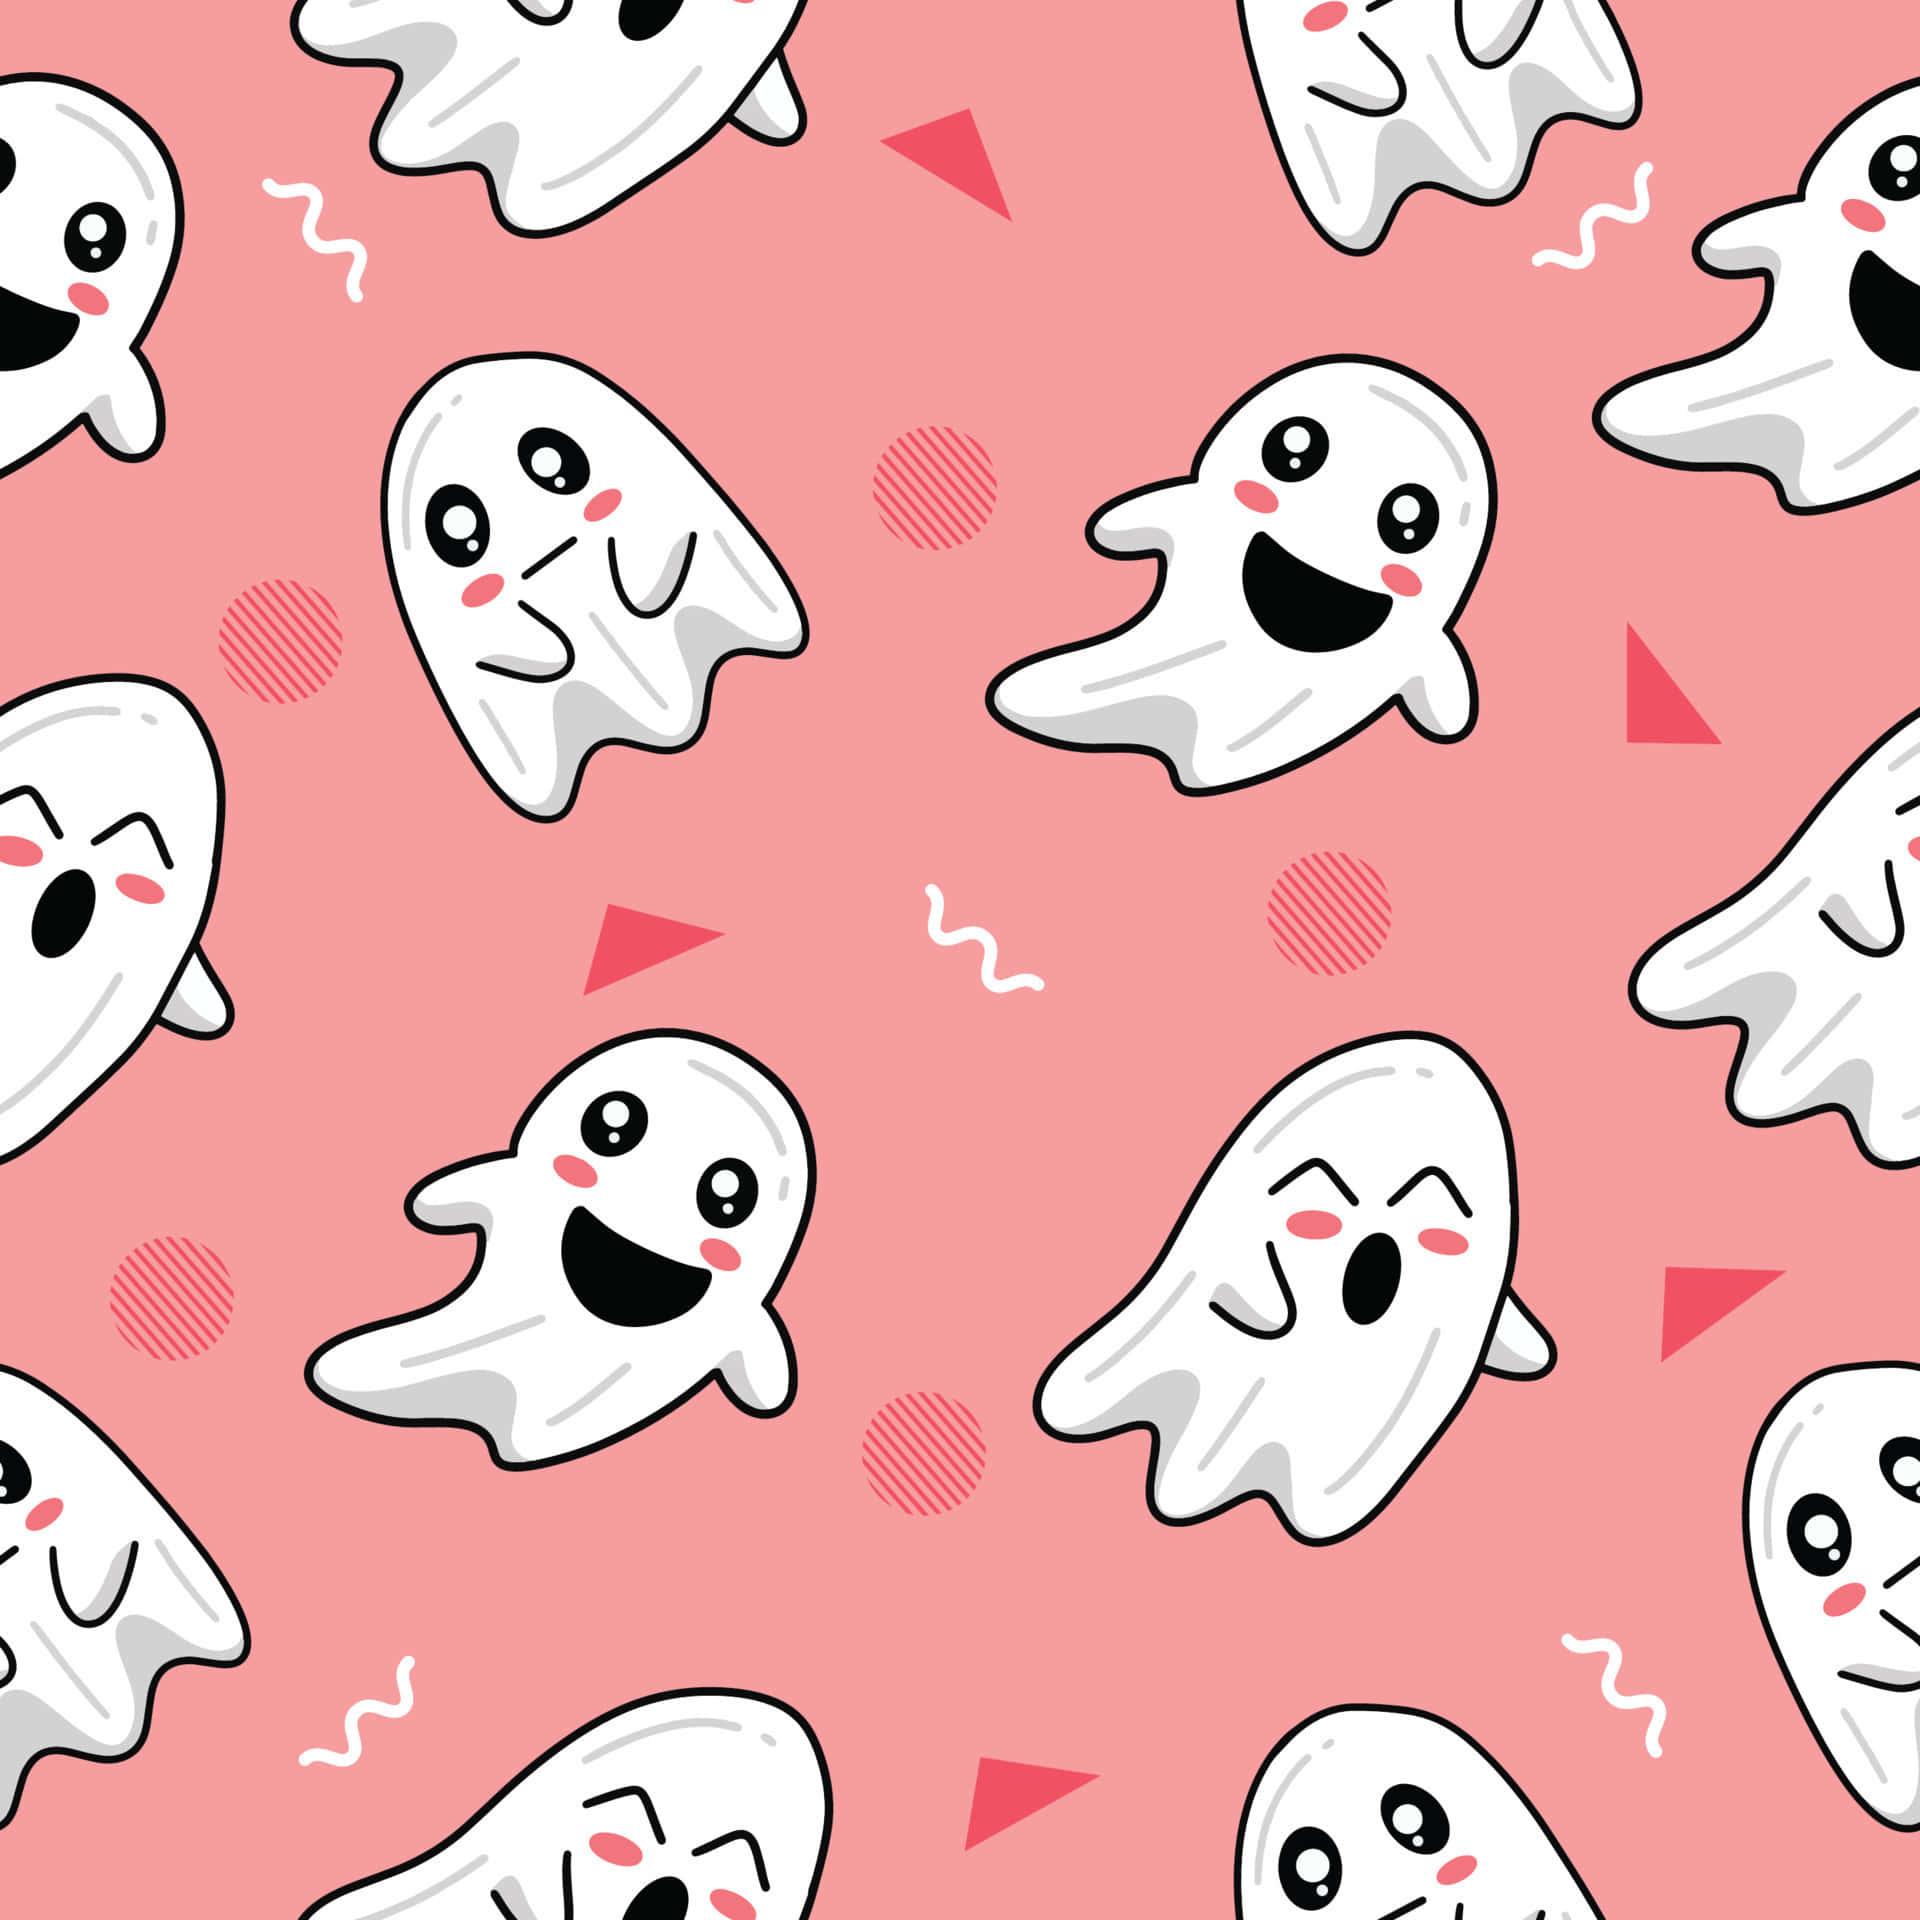 "This cute ghost is ready to have some fun!" Wallpaper